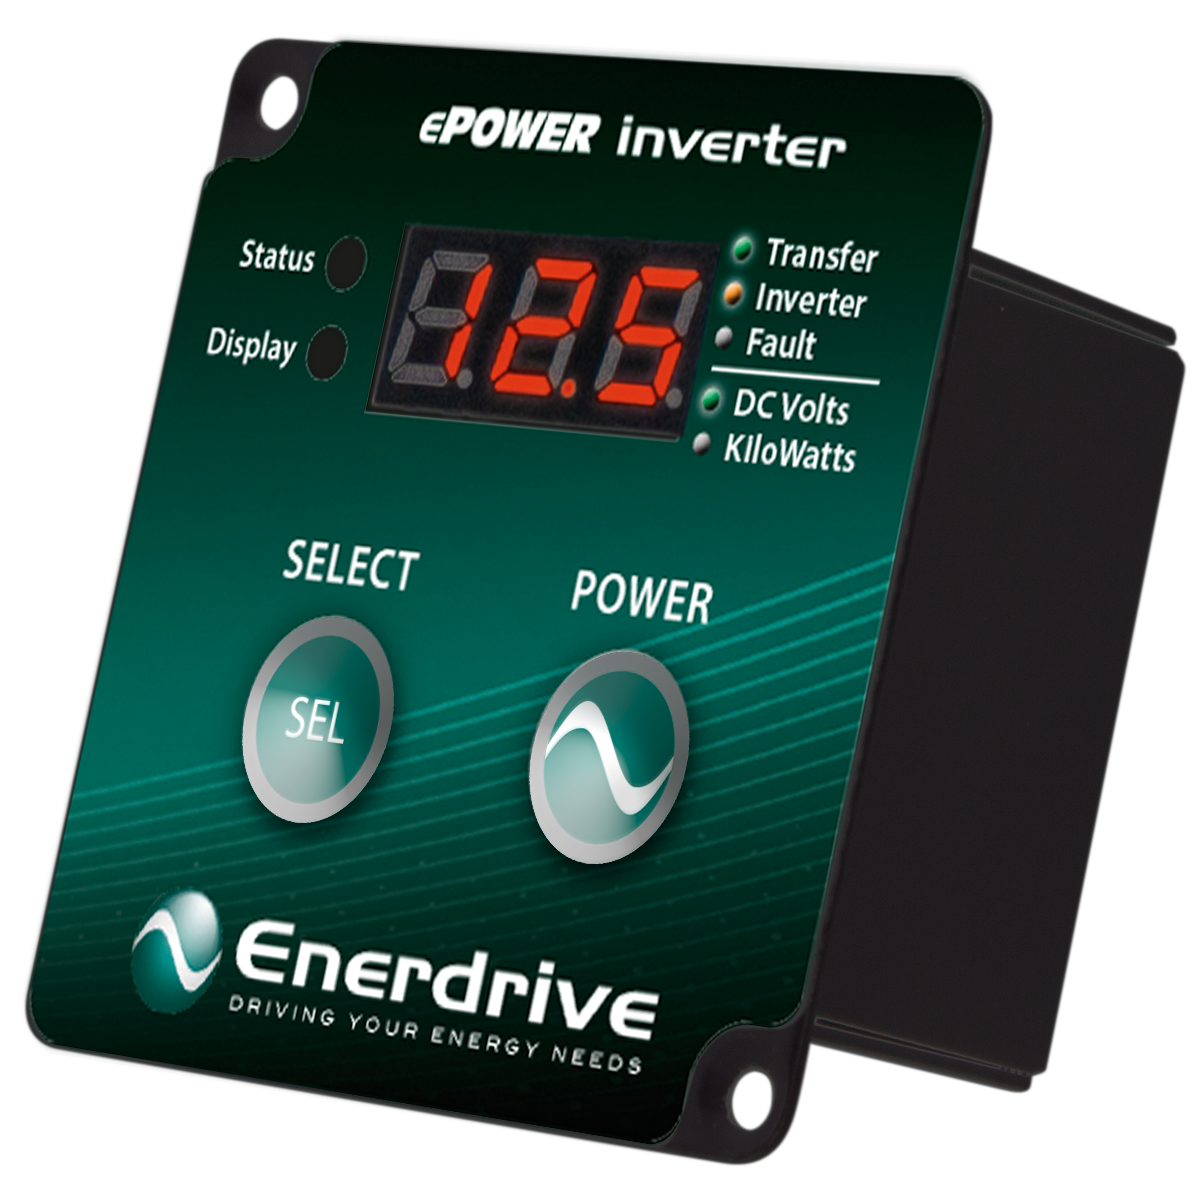 ePOWER 2600WX Inverter + DC Cable Pack